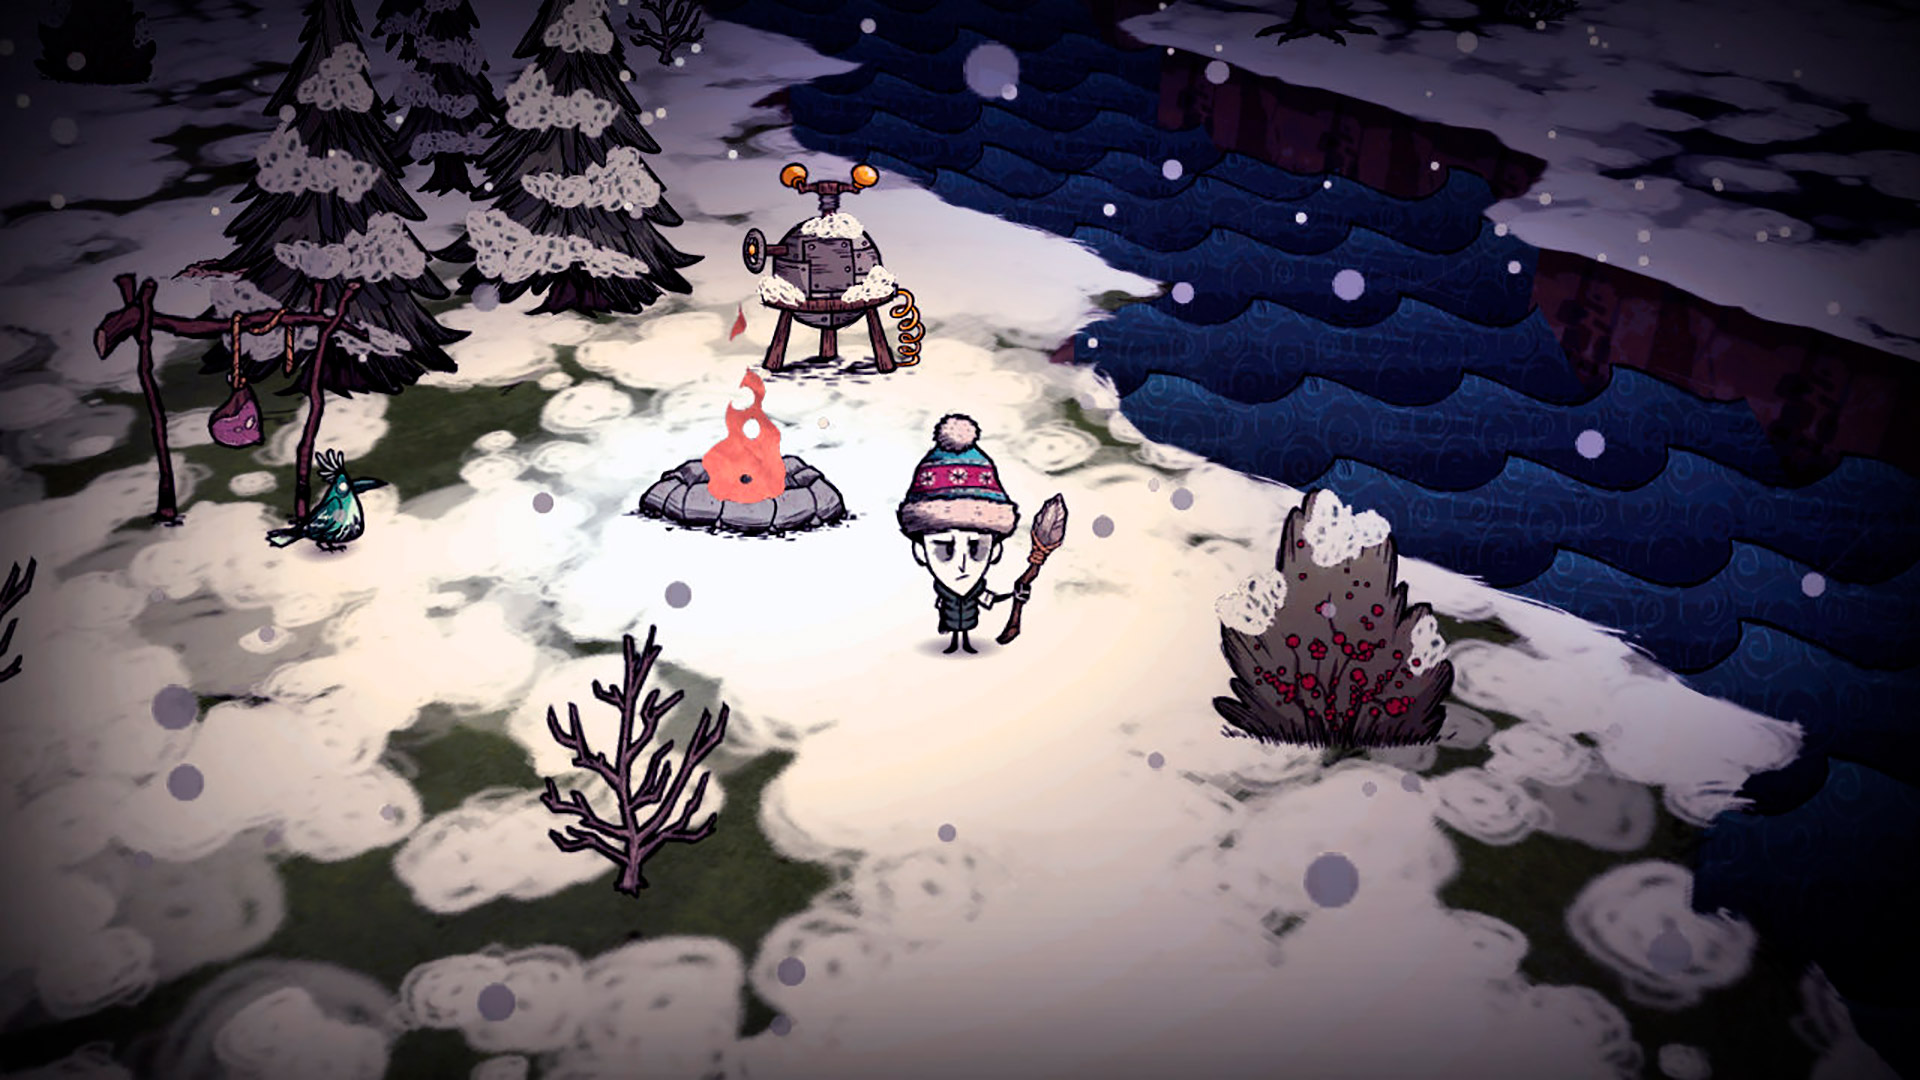 Don t start new. Don t Starve. Донт старв на пс4. Донт старв Скриншоты. Don't Starve Winter.